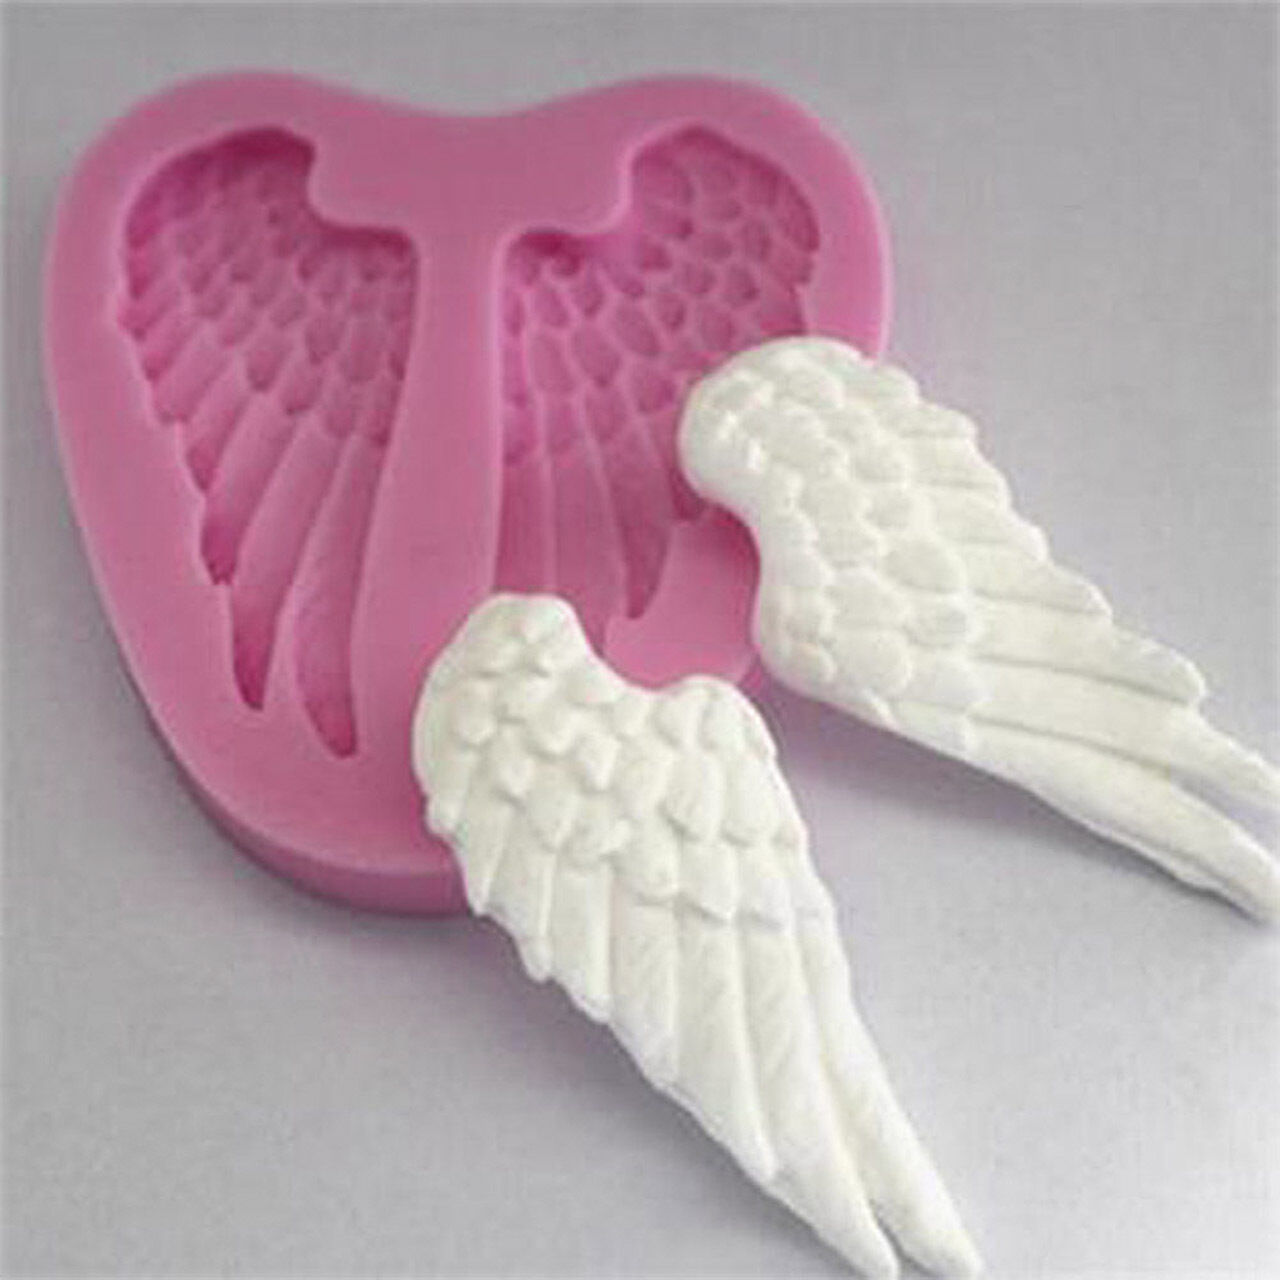 Silicone Angel wings Mold Gorgeous Fondant Mould Sugar Decor Cake craft Tool Baking Challenge the lowest price of Japan ☆ ·